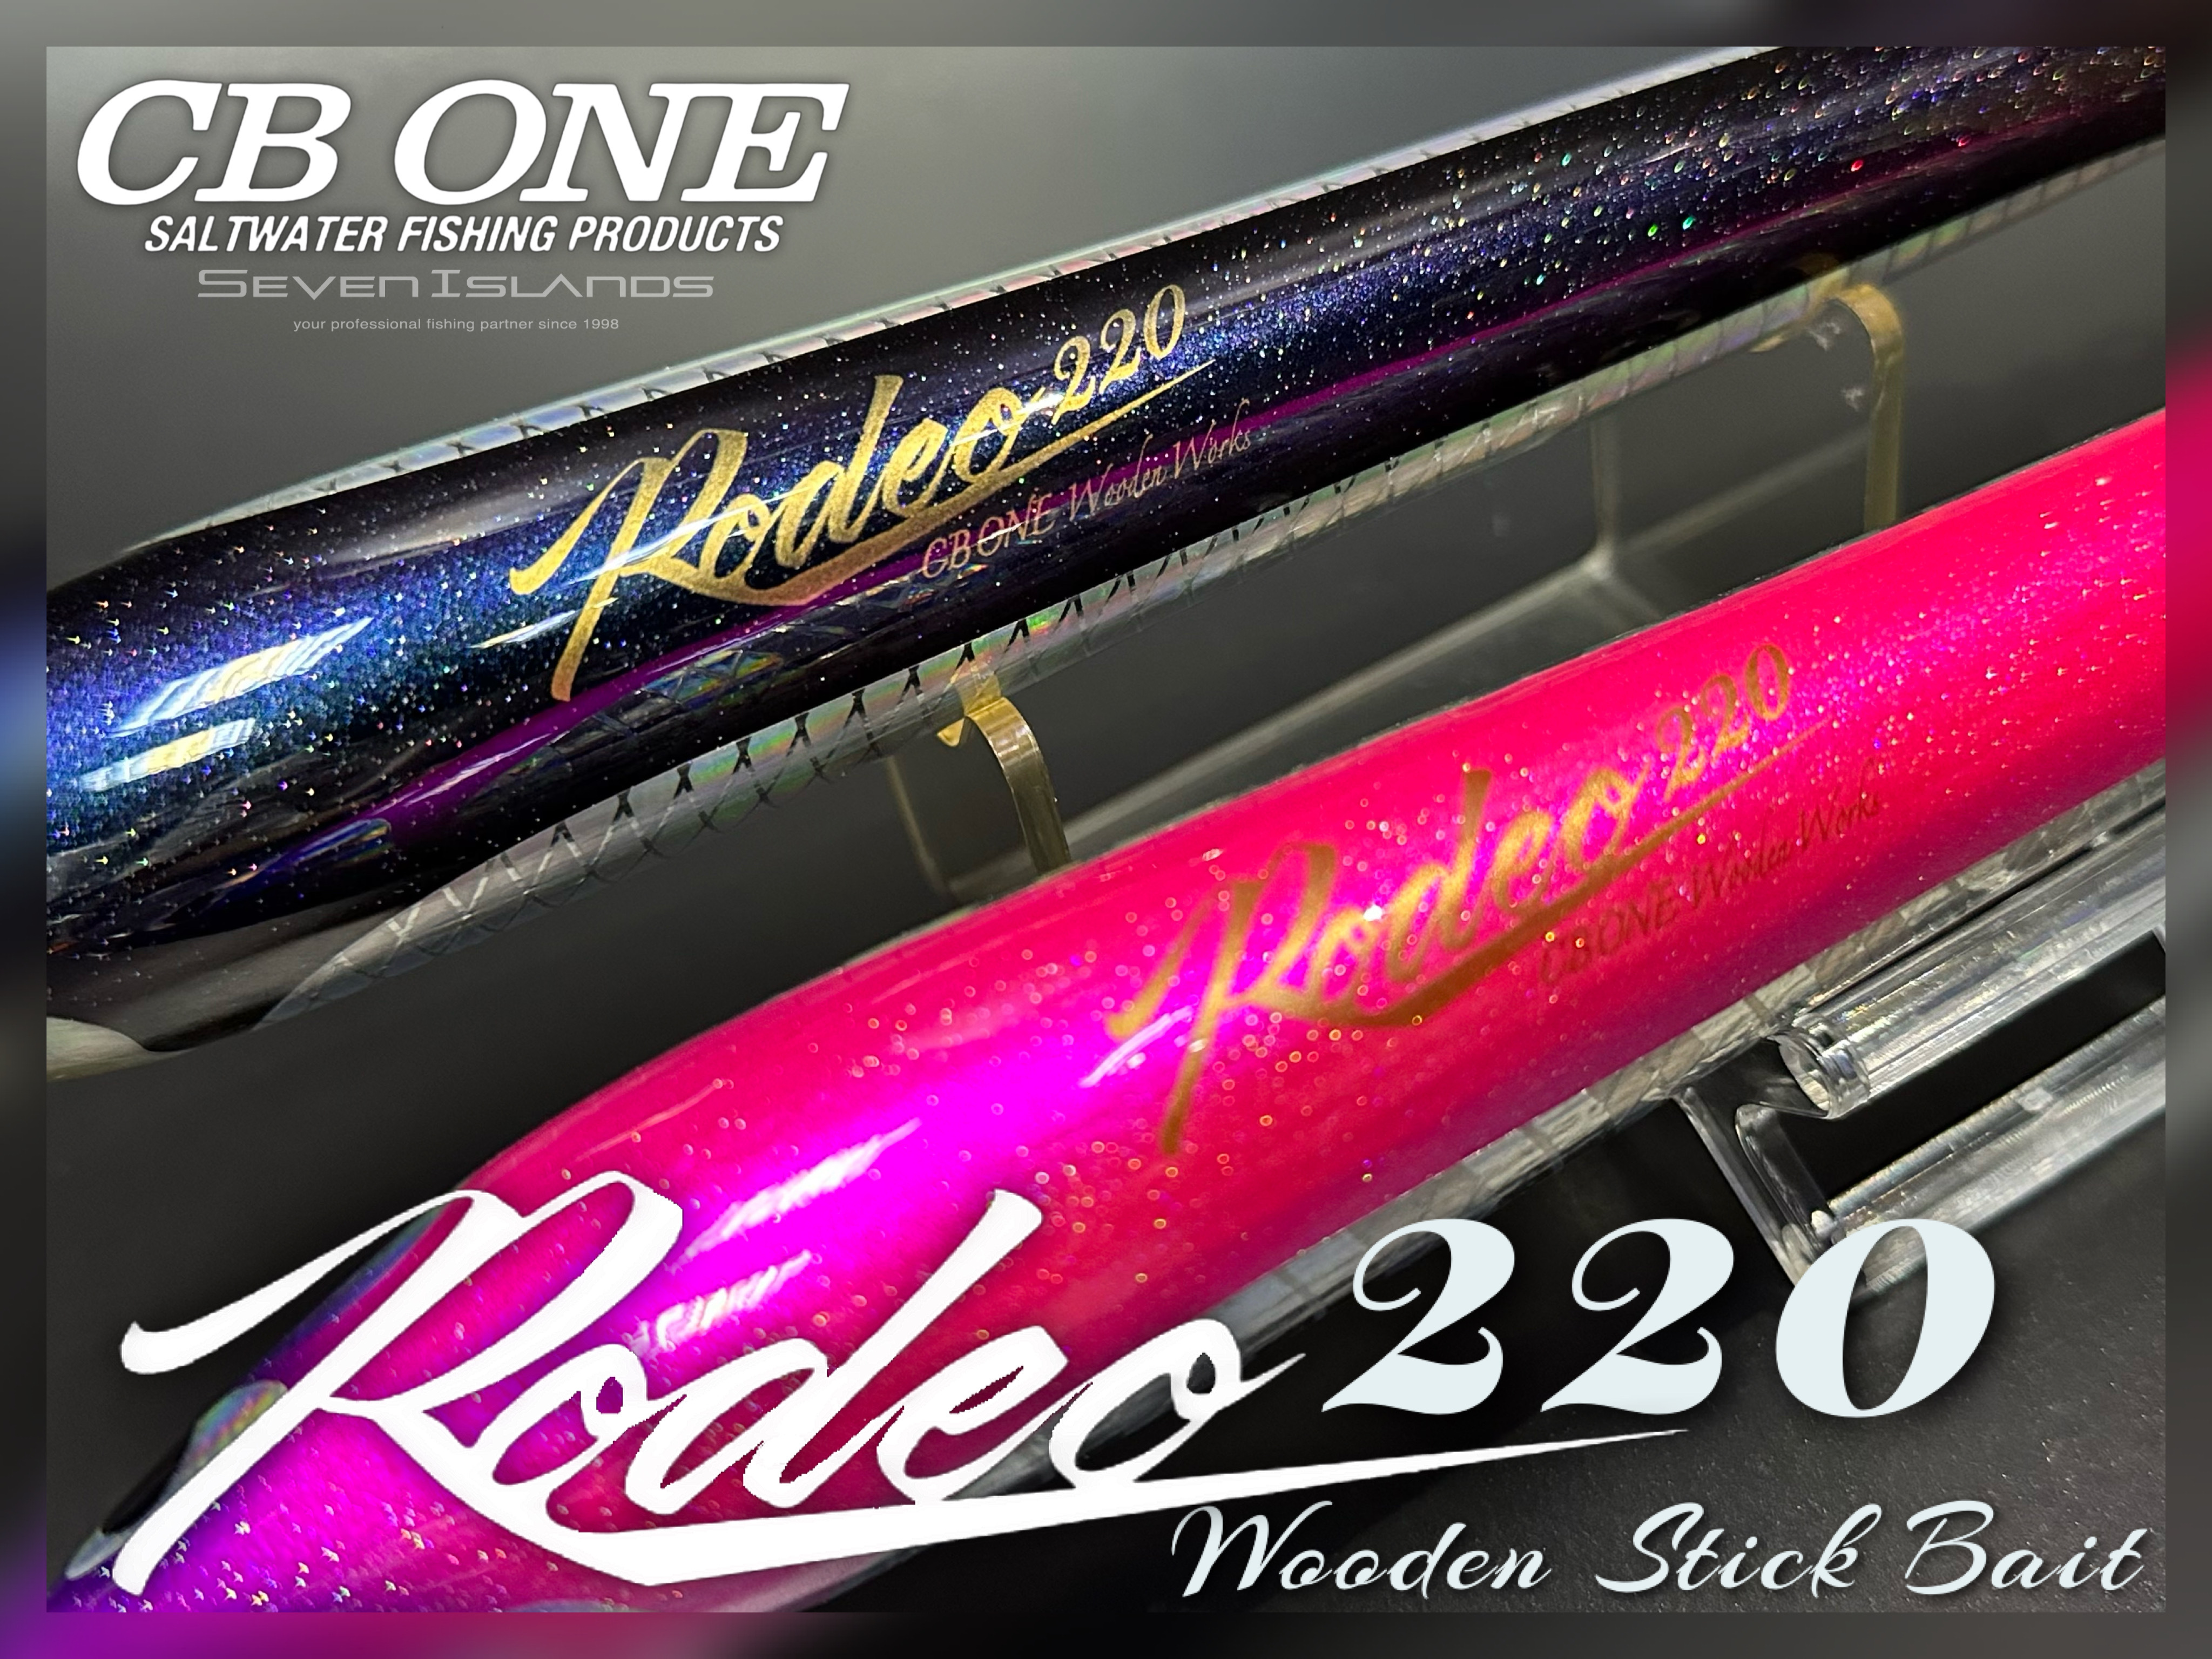 CB ONE Rodeo 220 Wooden Stick Bait